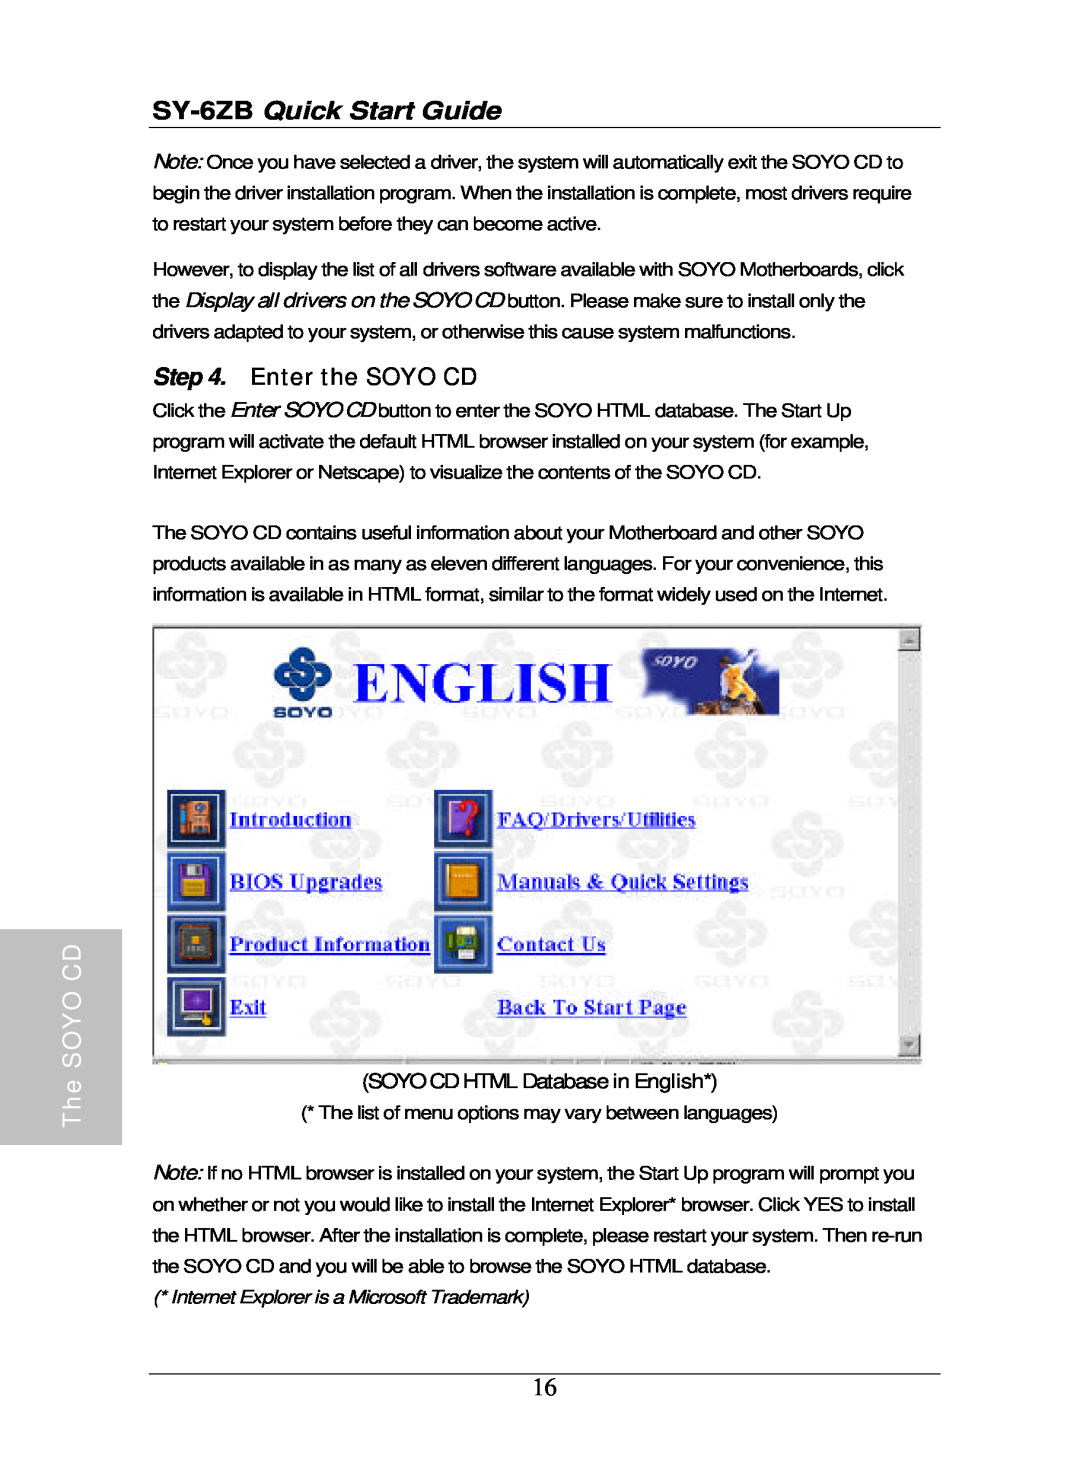 SOYO SY-6ZB Motherboard Enter the SOYO CD, SOYO CD HTML Database in English, The SOYO CD, SY-6ZB Quick Start Guide 